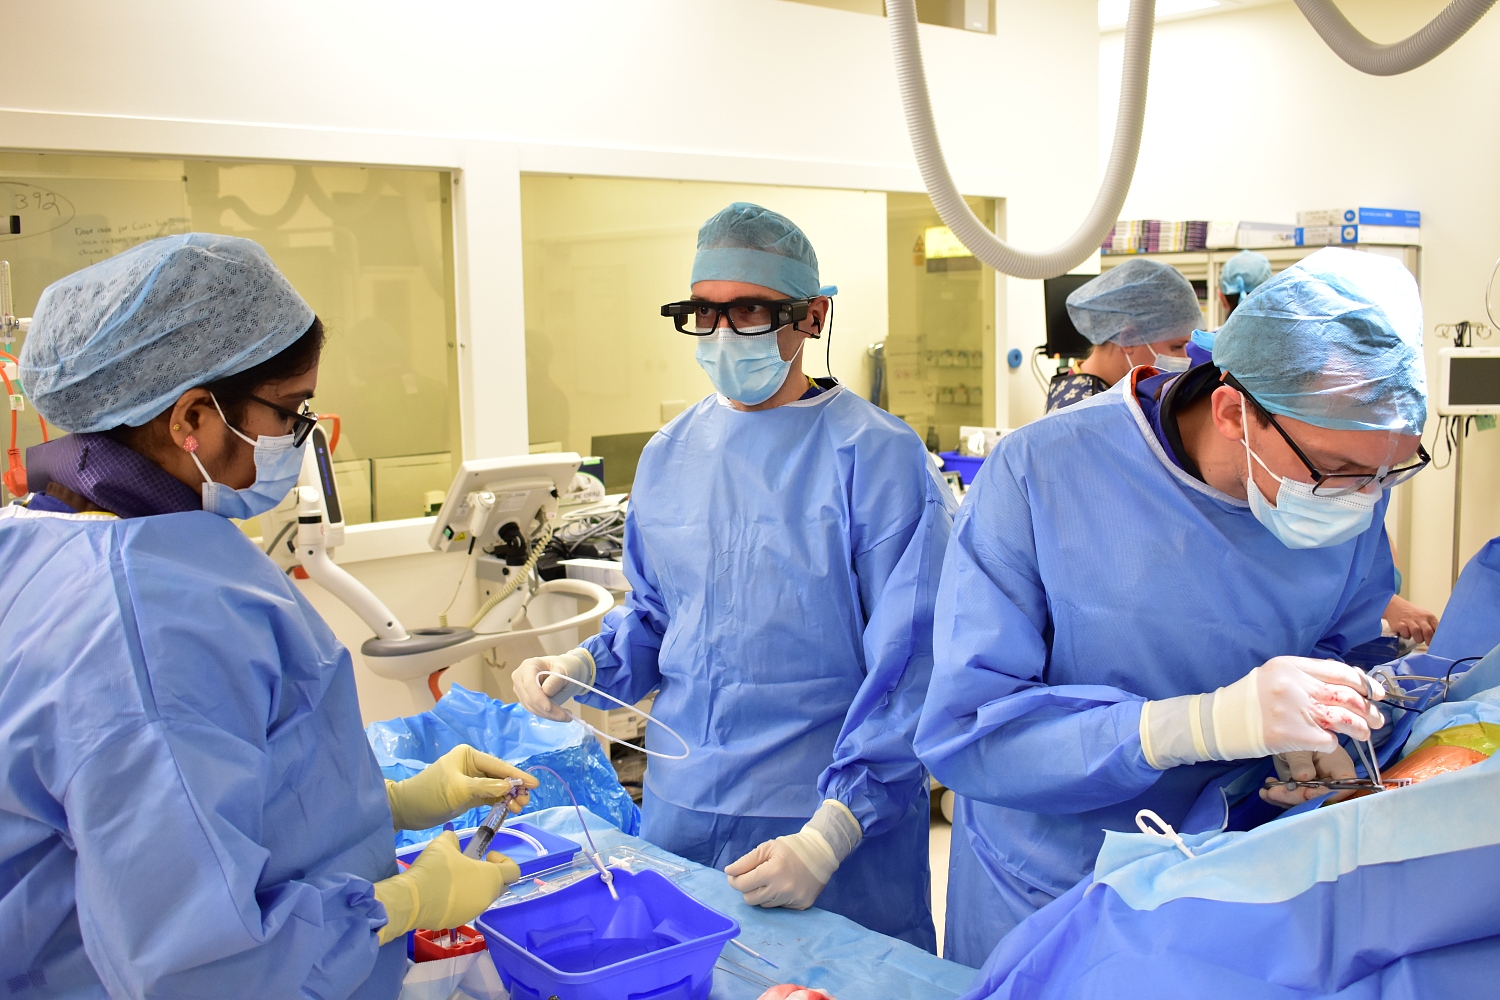 Dr Patrick Heck wearing the Smart Glasses during the cath lab procedure